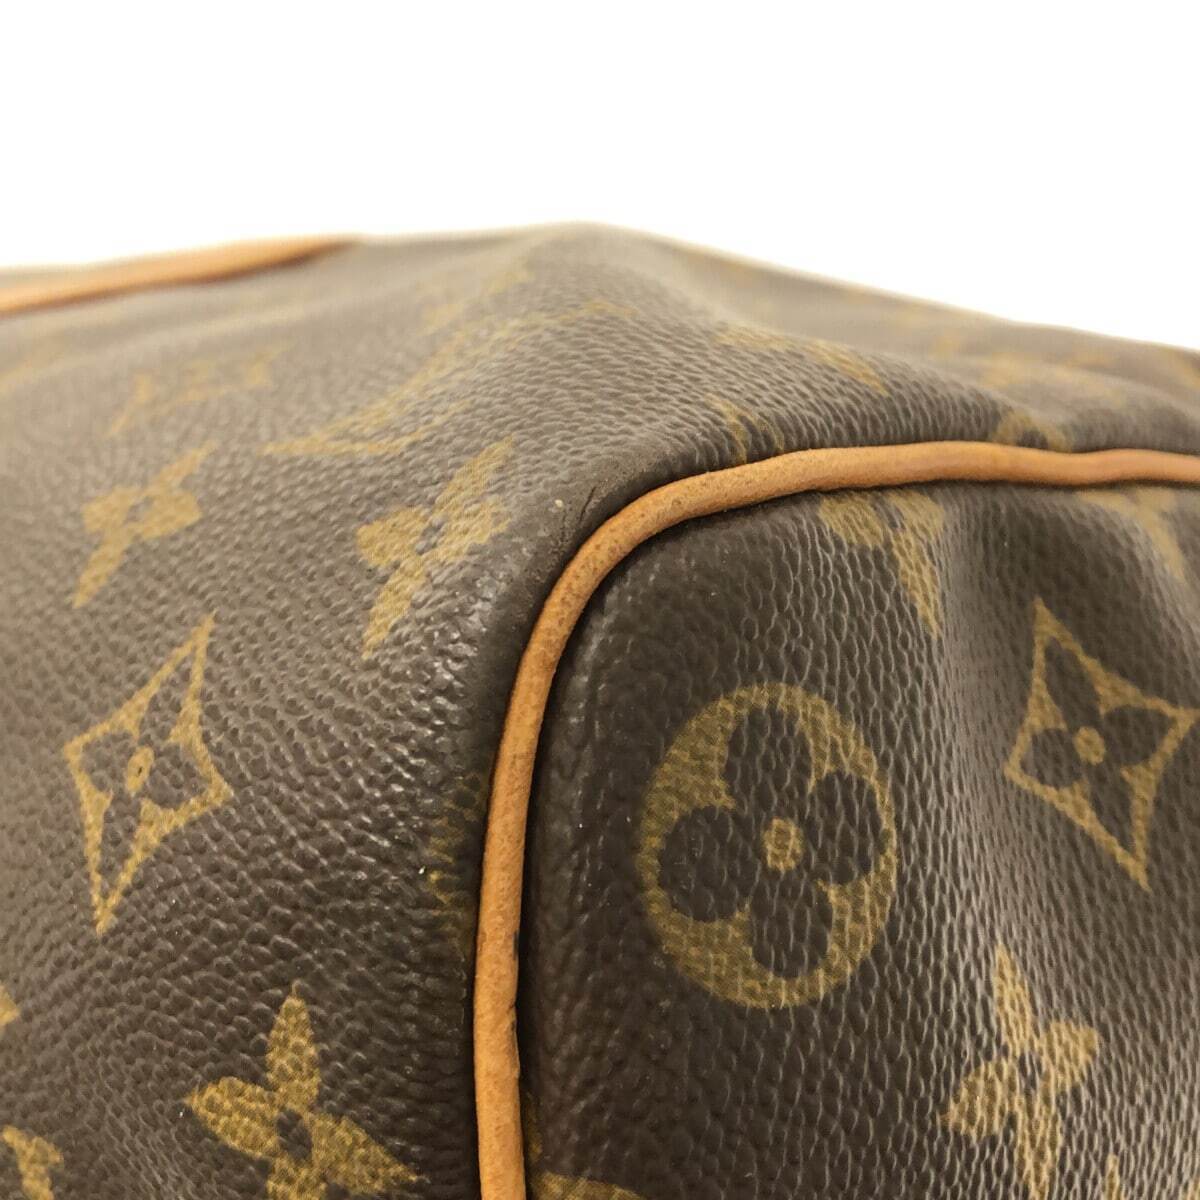 Louis Vuitton by The French Company Monogram Keepall Bag Travel Duffle 45cm